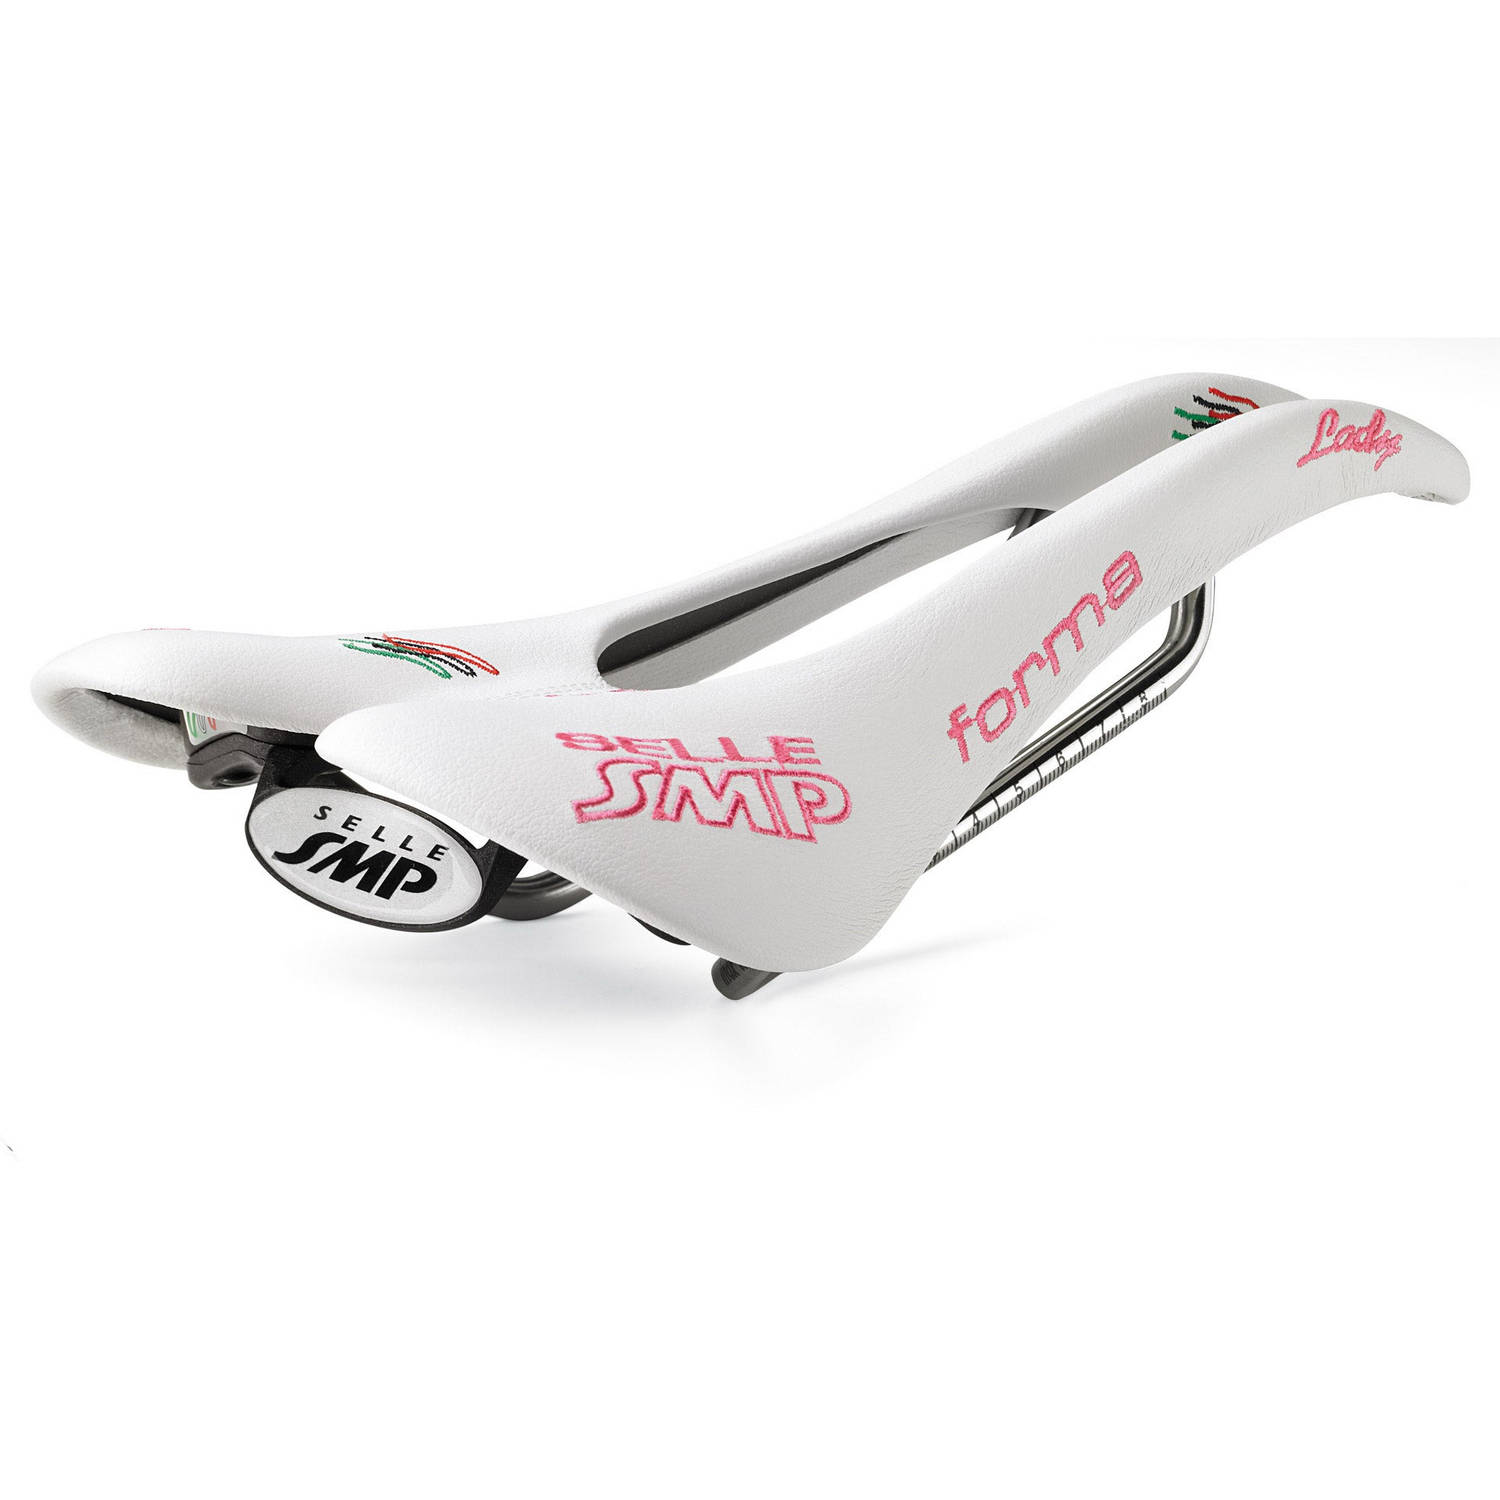 Selle SMP Pro Forma Lady Racefiets Zadel Wit